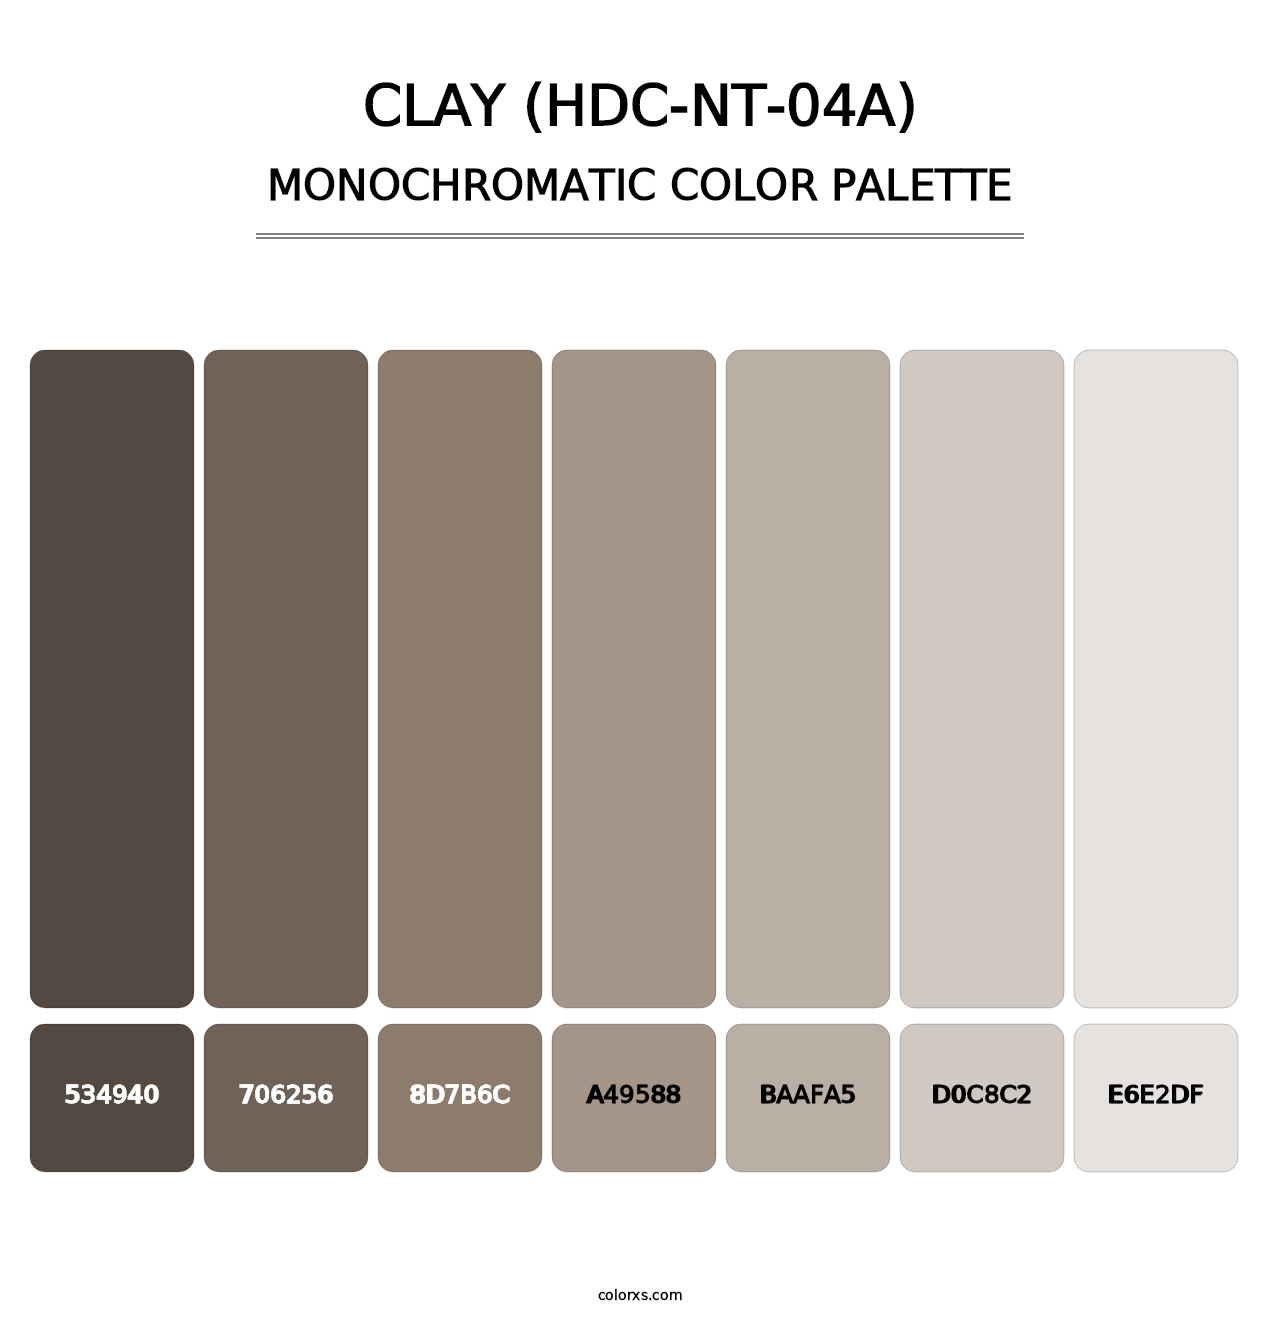 Clay (HDC-NT-04A) - Monochromatic Color Palette